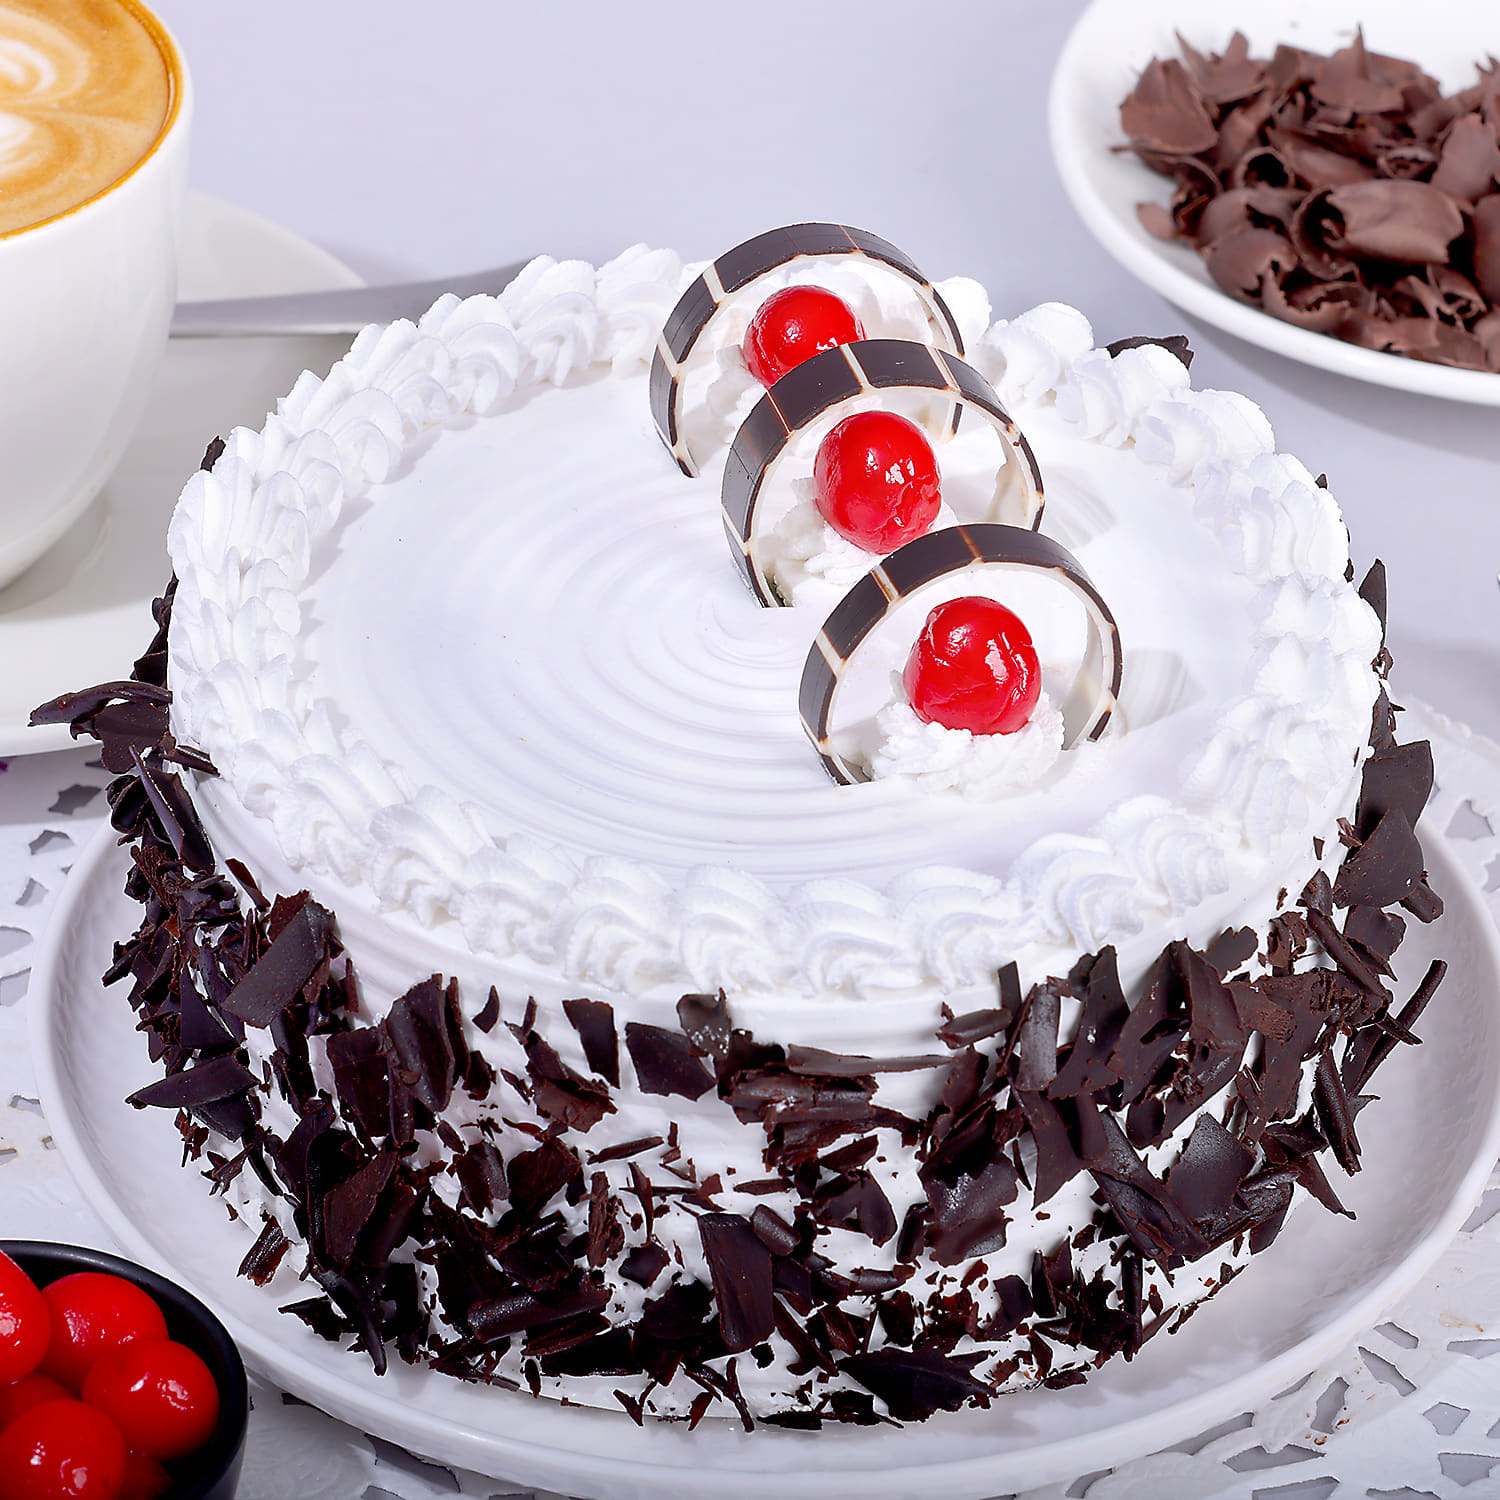 The Best Online Bakery in Gurgaon for Online Cake Delivery | GurgaonBakers